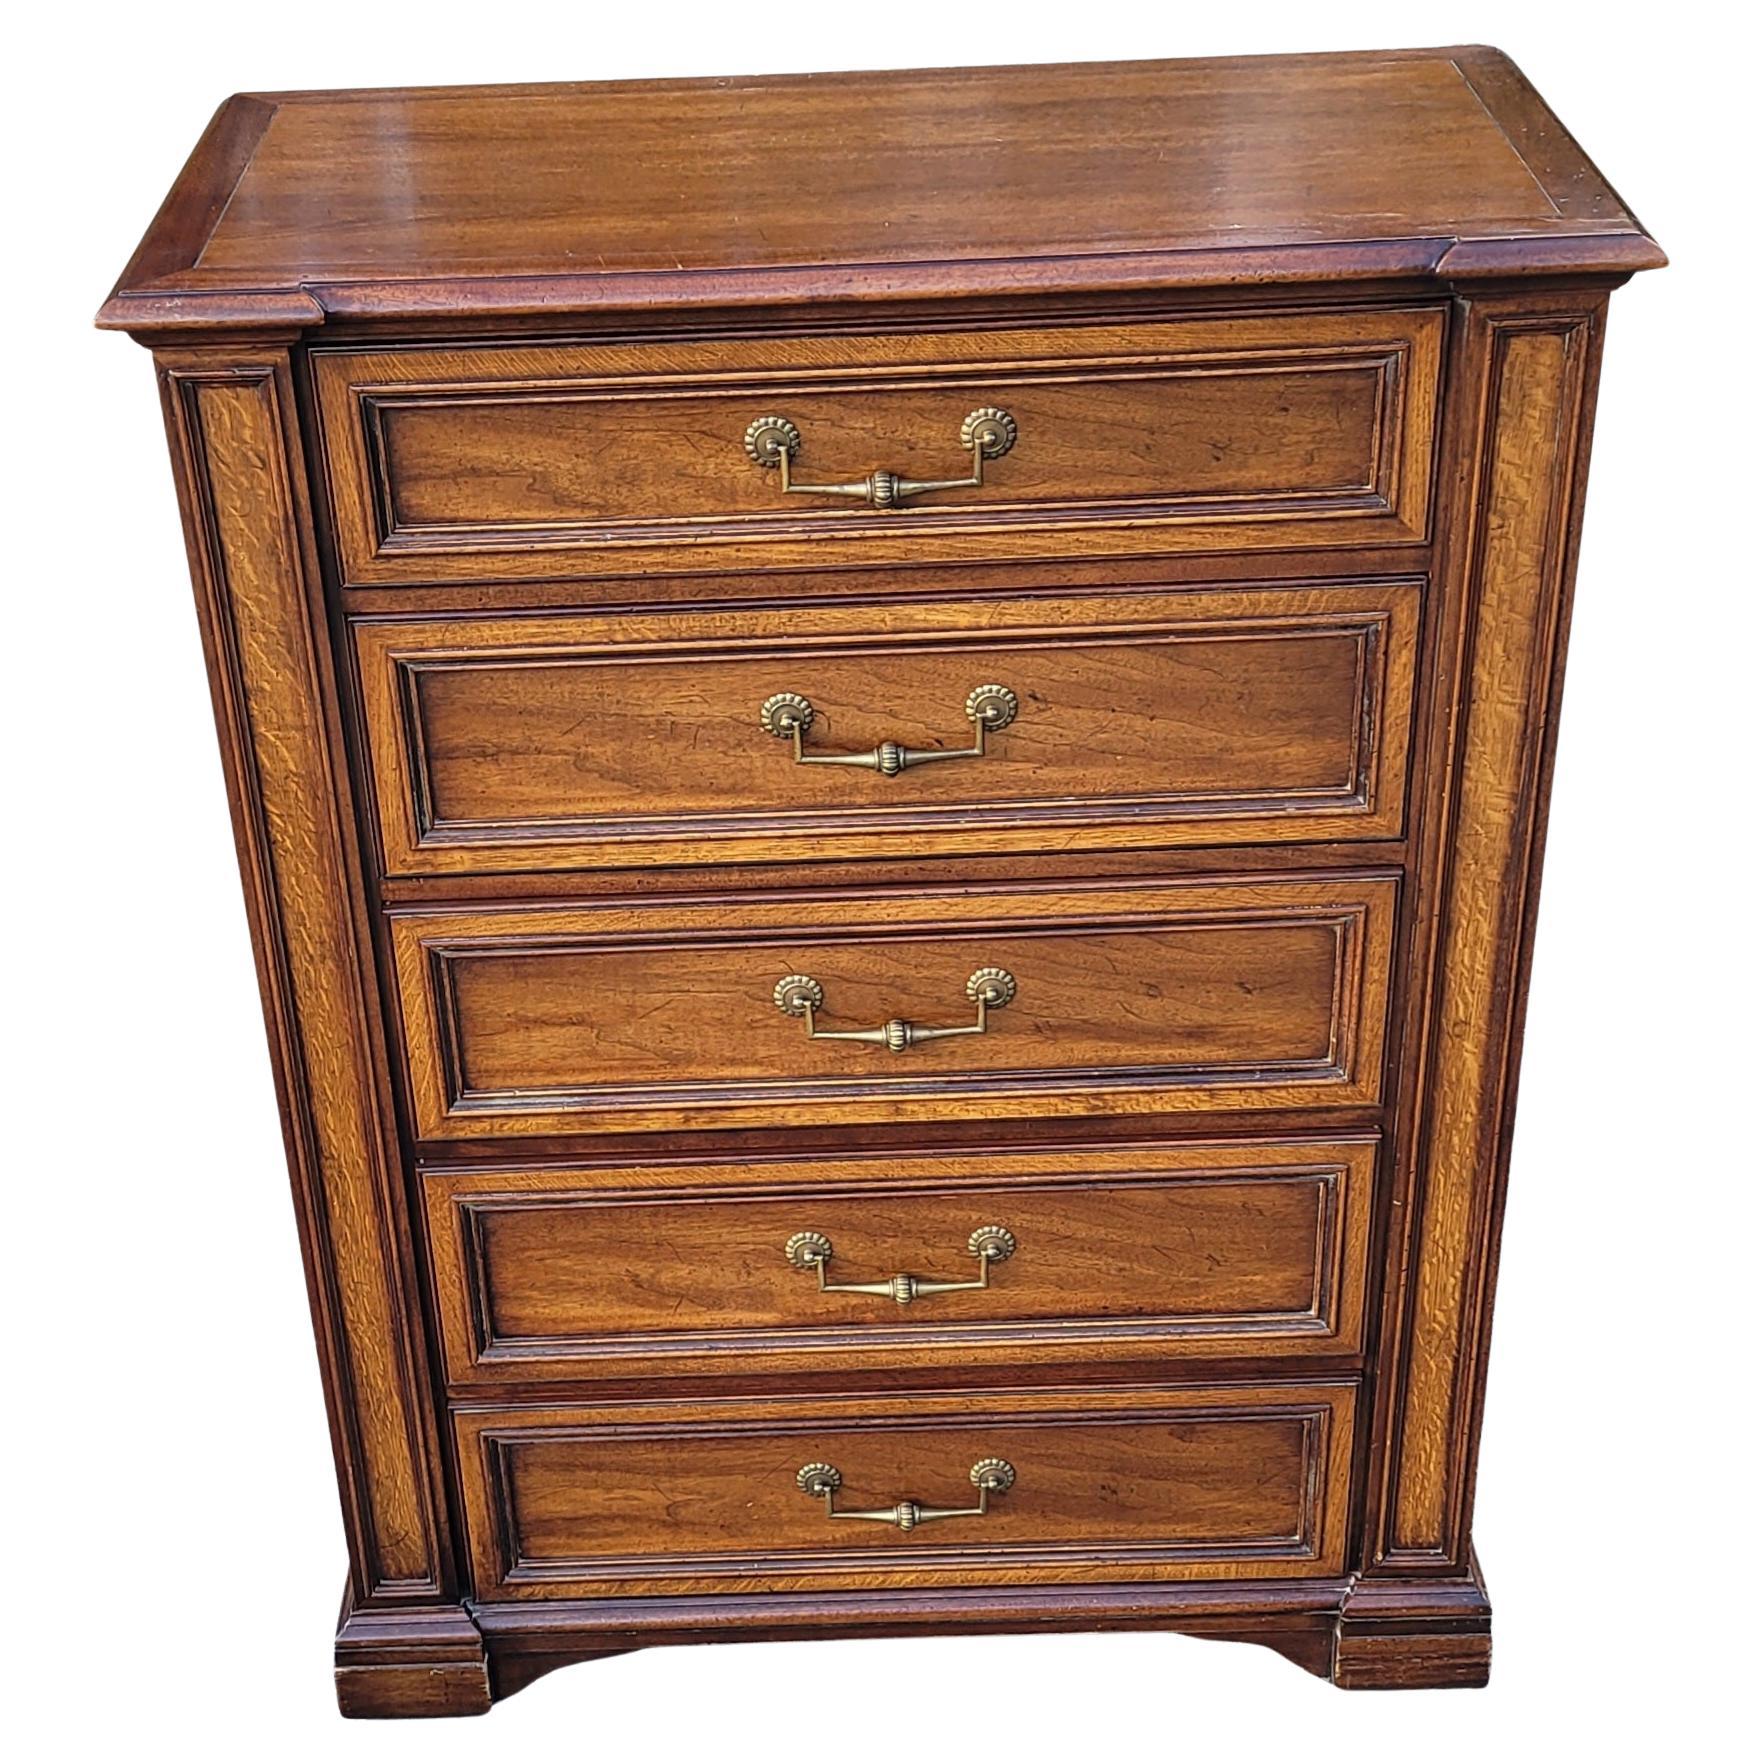 Very fine Henredon Fine Furniture 5-drawer chest of drawers in great condition. 
Amazing combination of Solid walnut and mission oak construction. Dovetailed joinery drawers. Top drawers with dividers. Very clean in and out. 
Measures 40